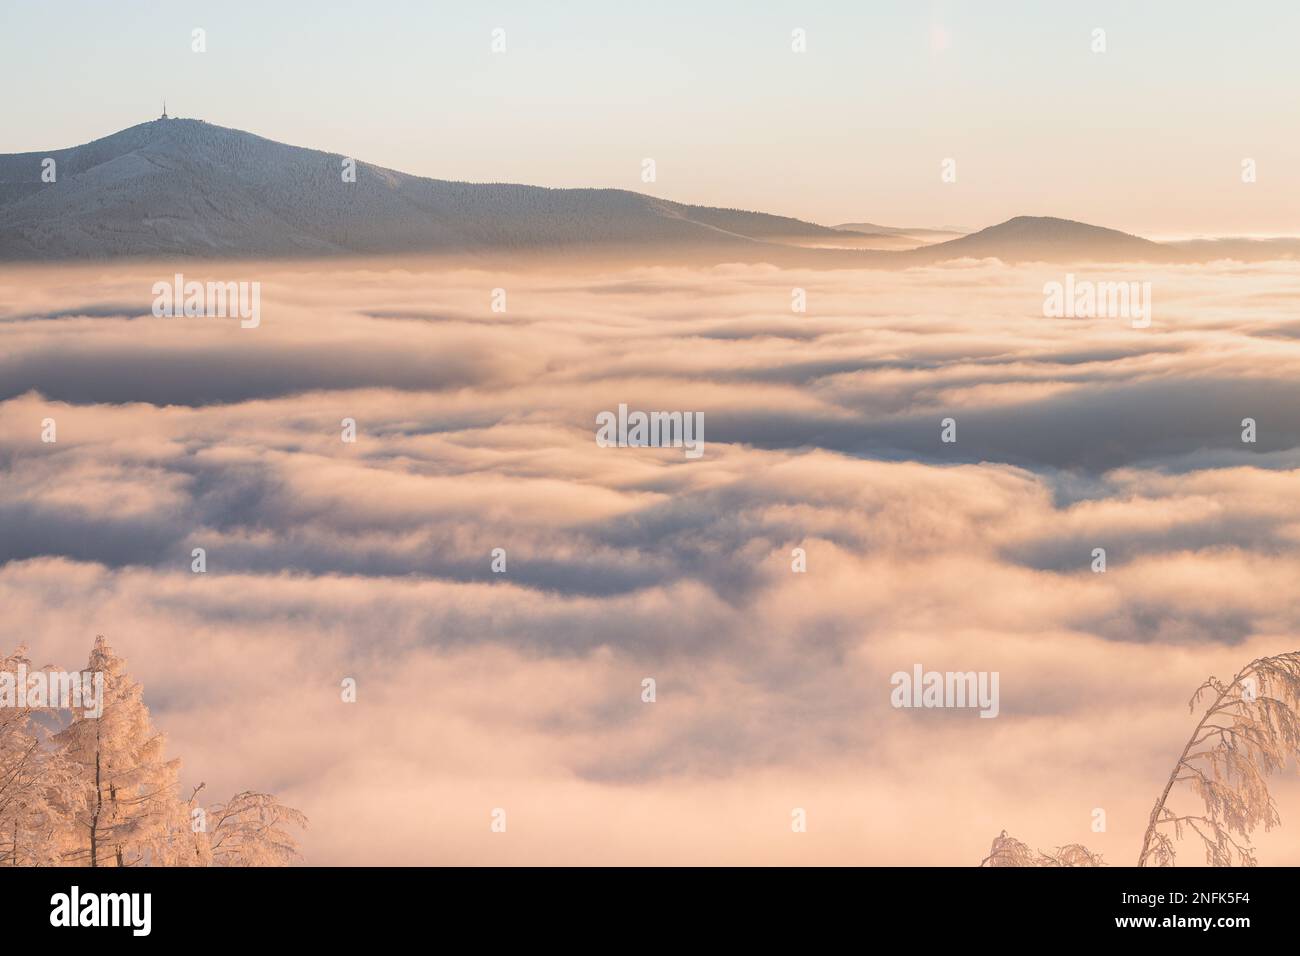 View of sea of clouds colored in the soft orange-pink hue of the morning sun. Peaks of the mountains rising out of this impermeable curtain. Sense of Stock Photo